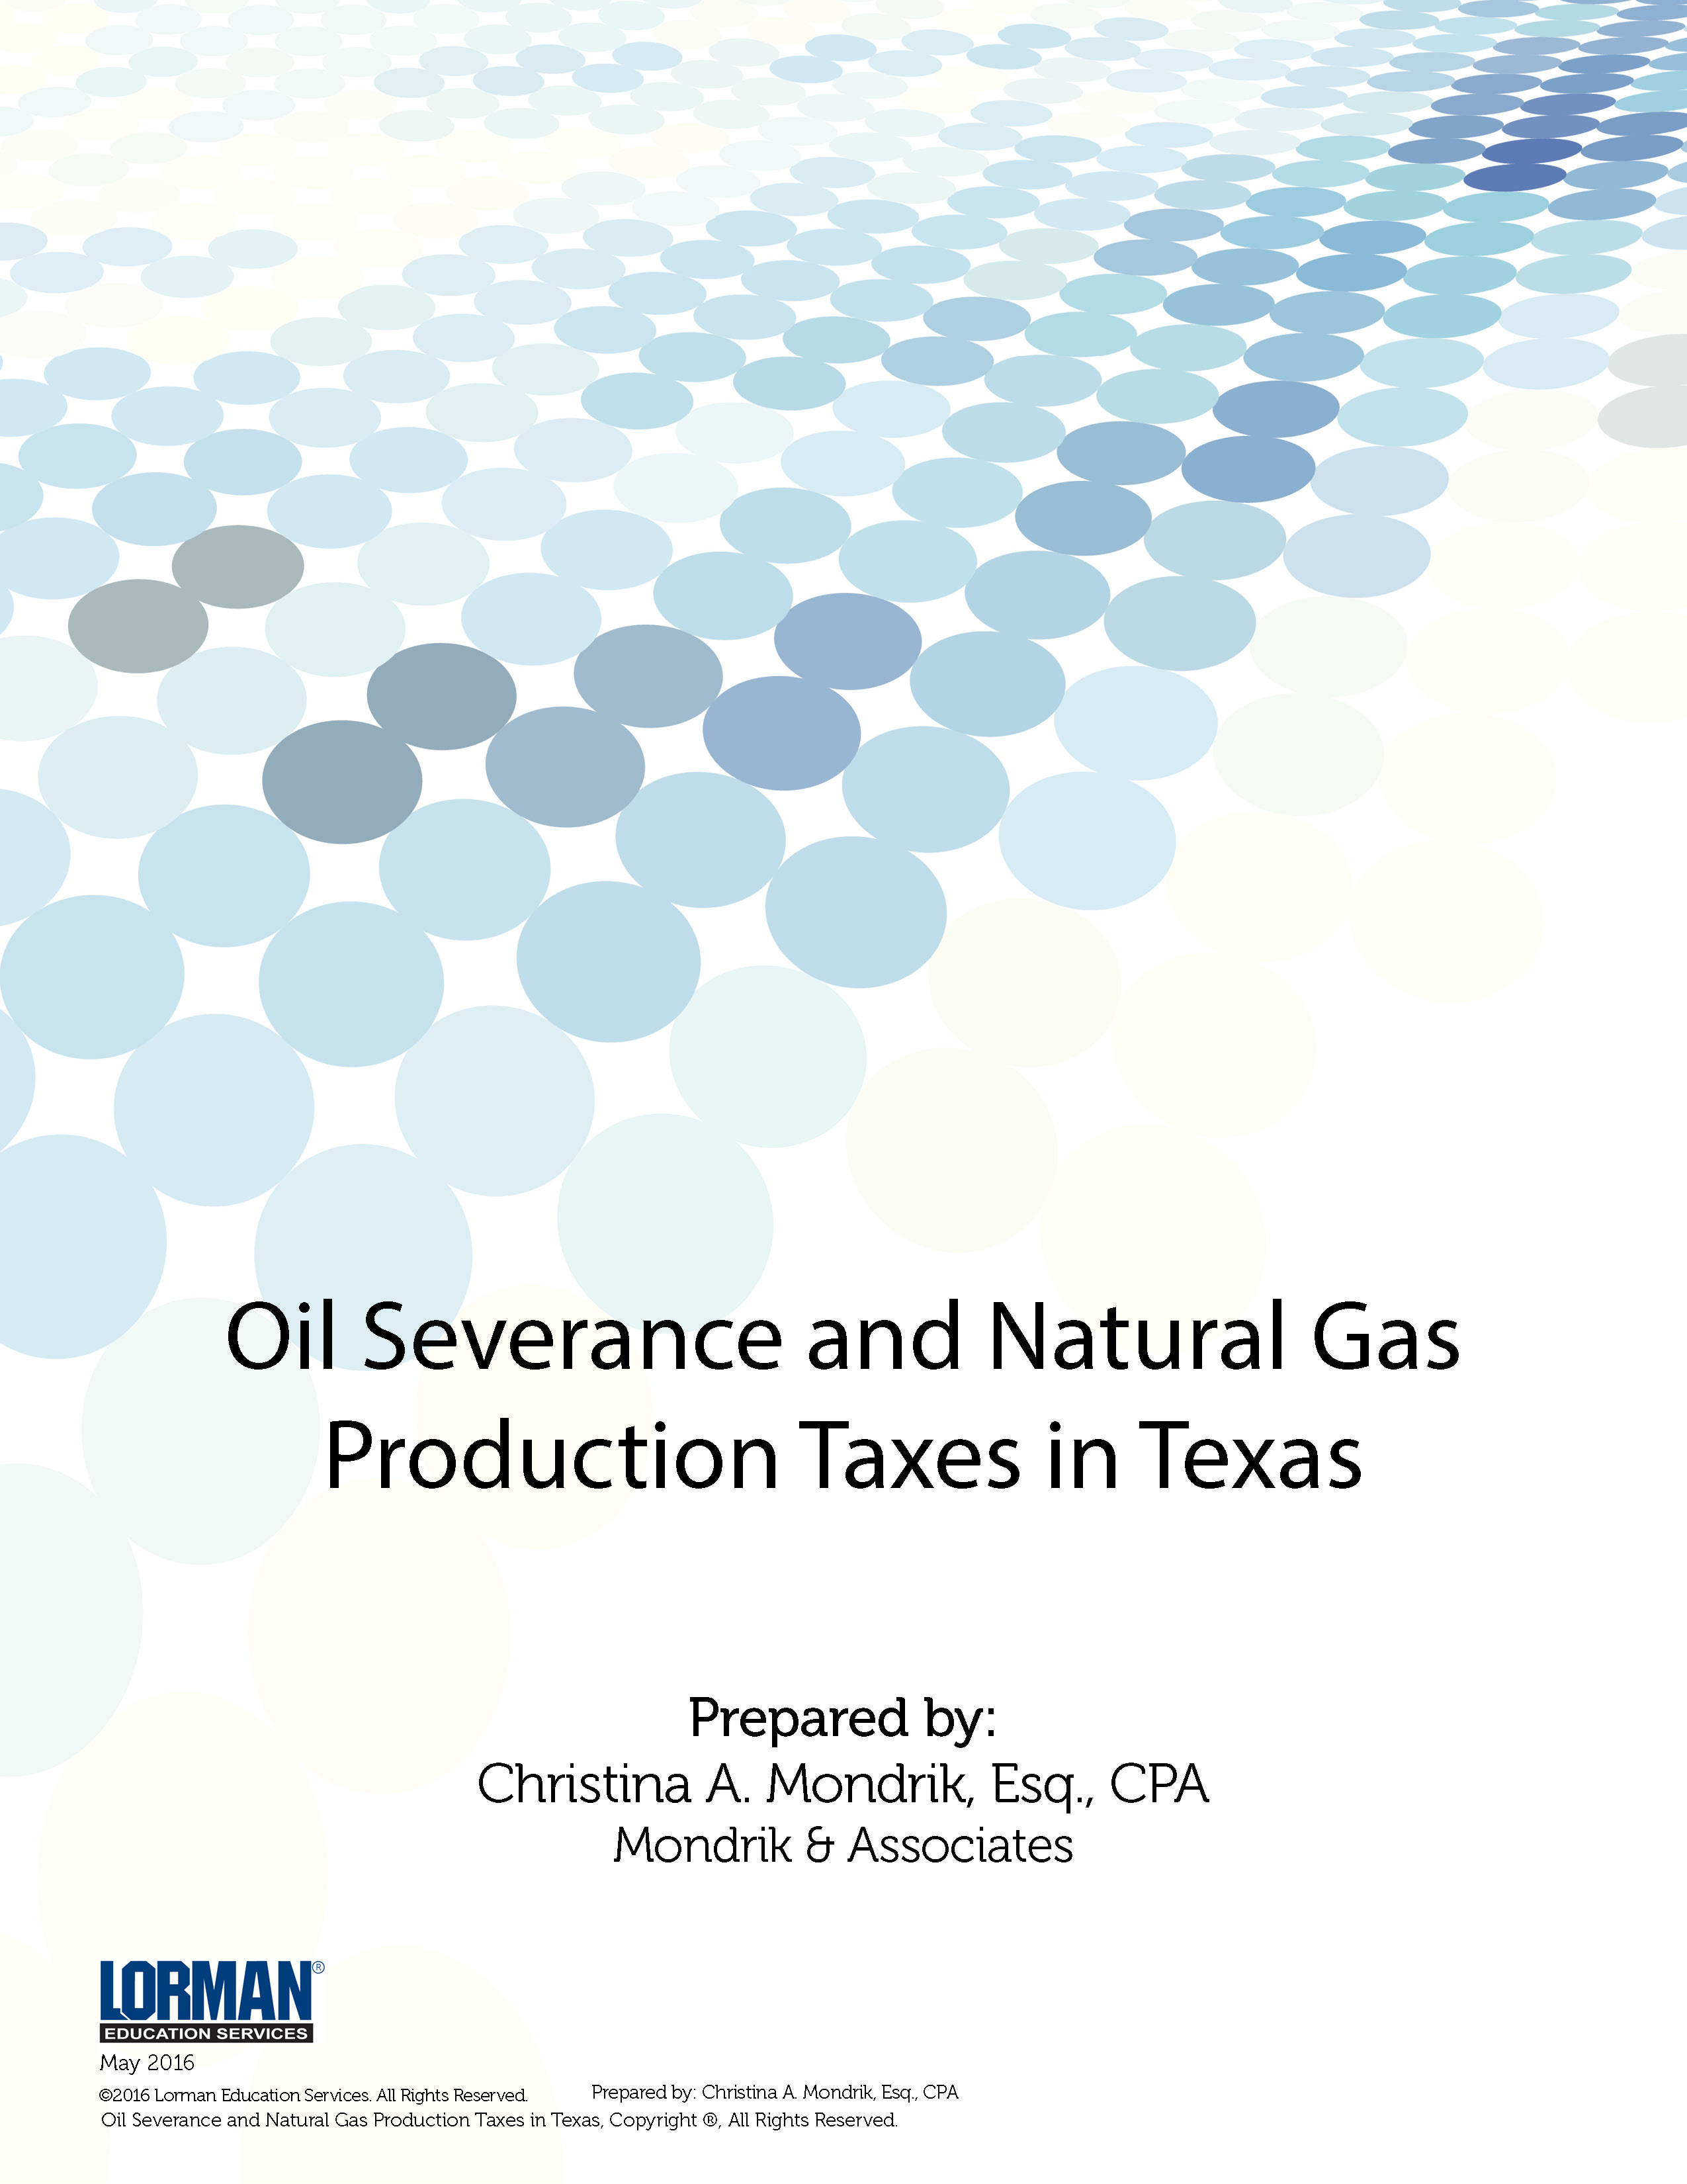 Oil Severance and Natural Gas Production Taxes in Texas